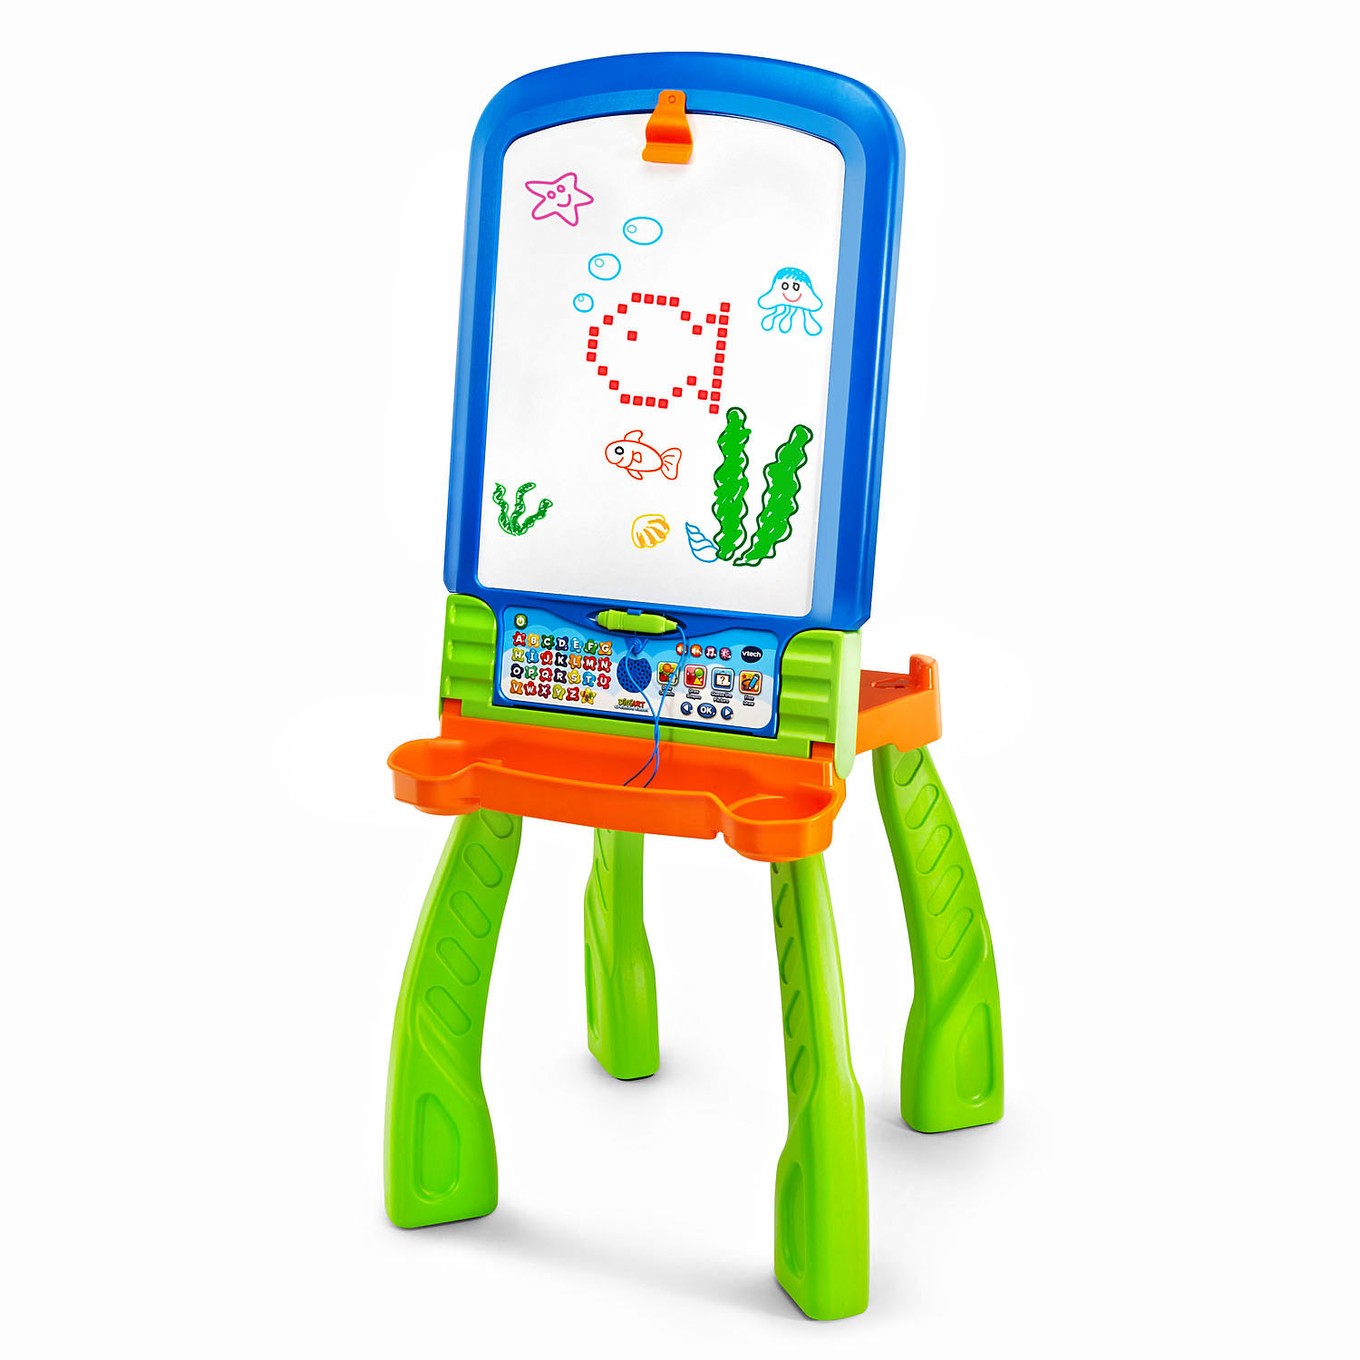 vtech toys 4 years